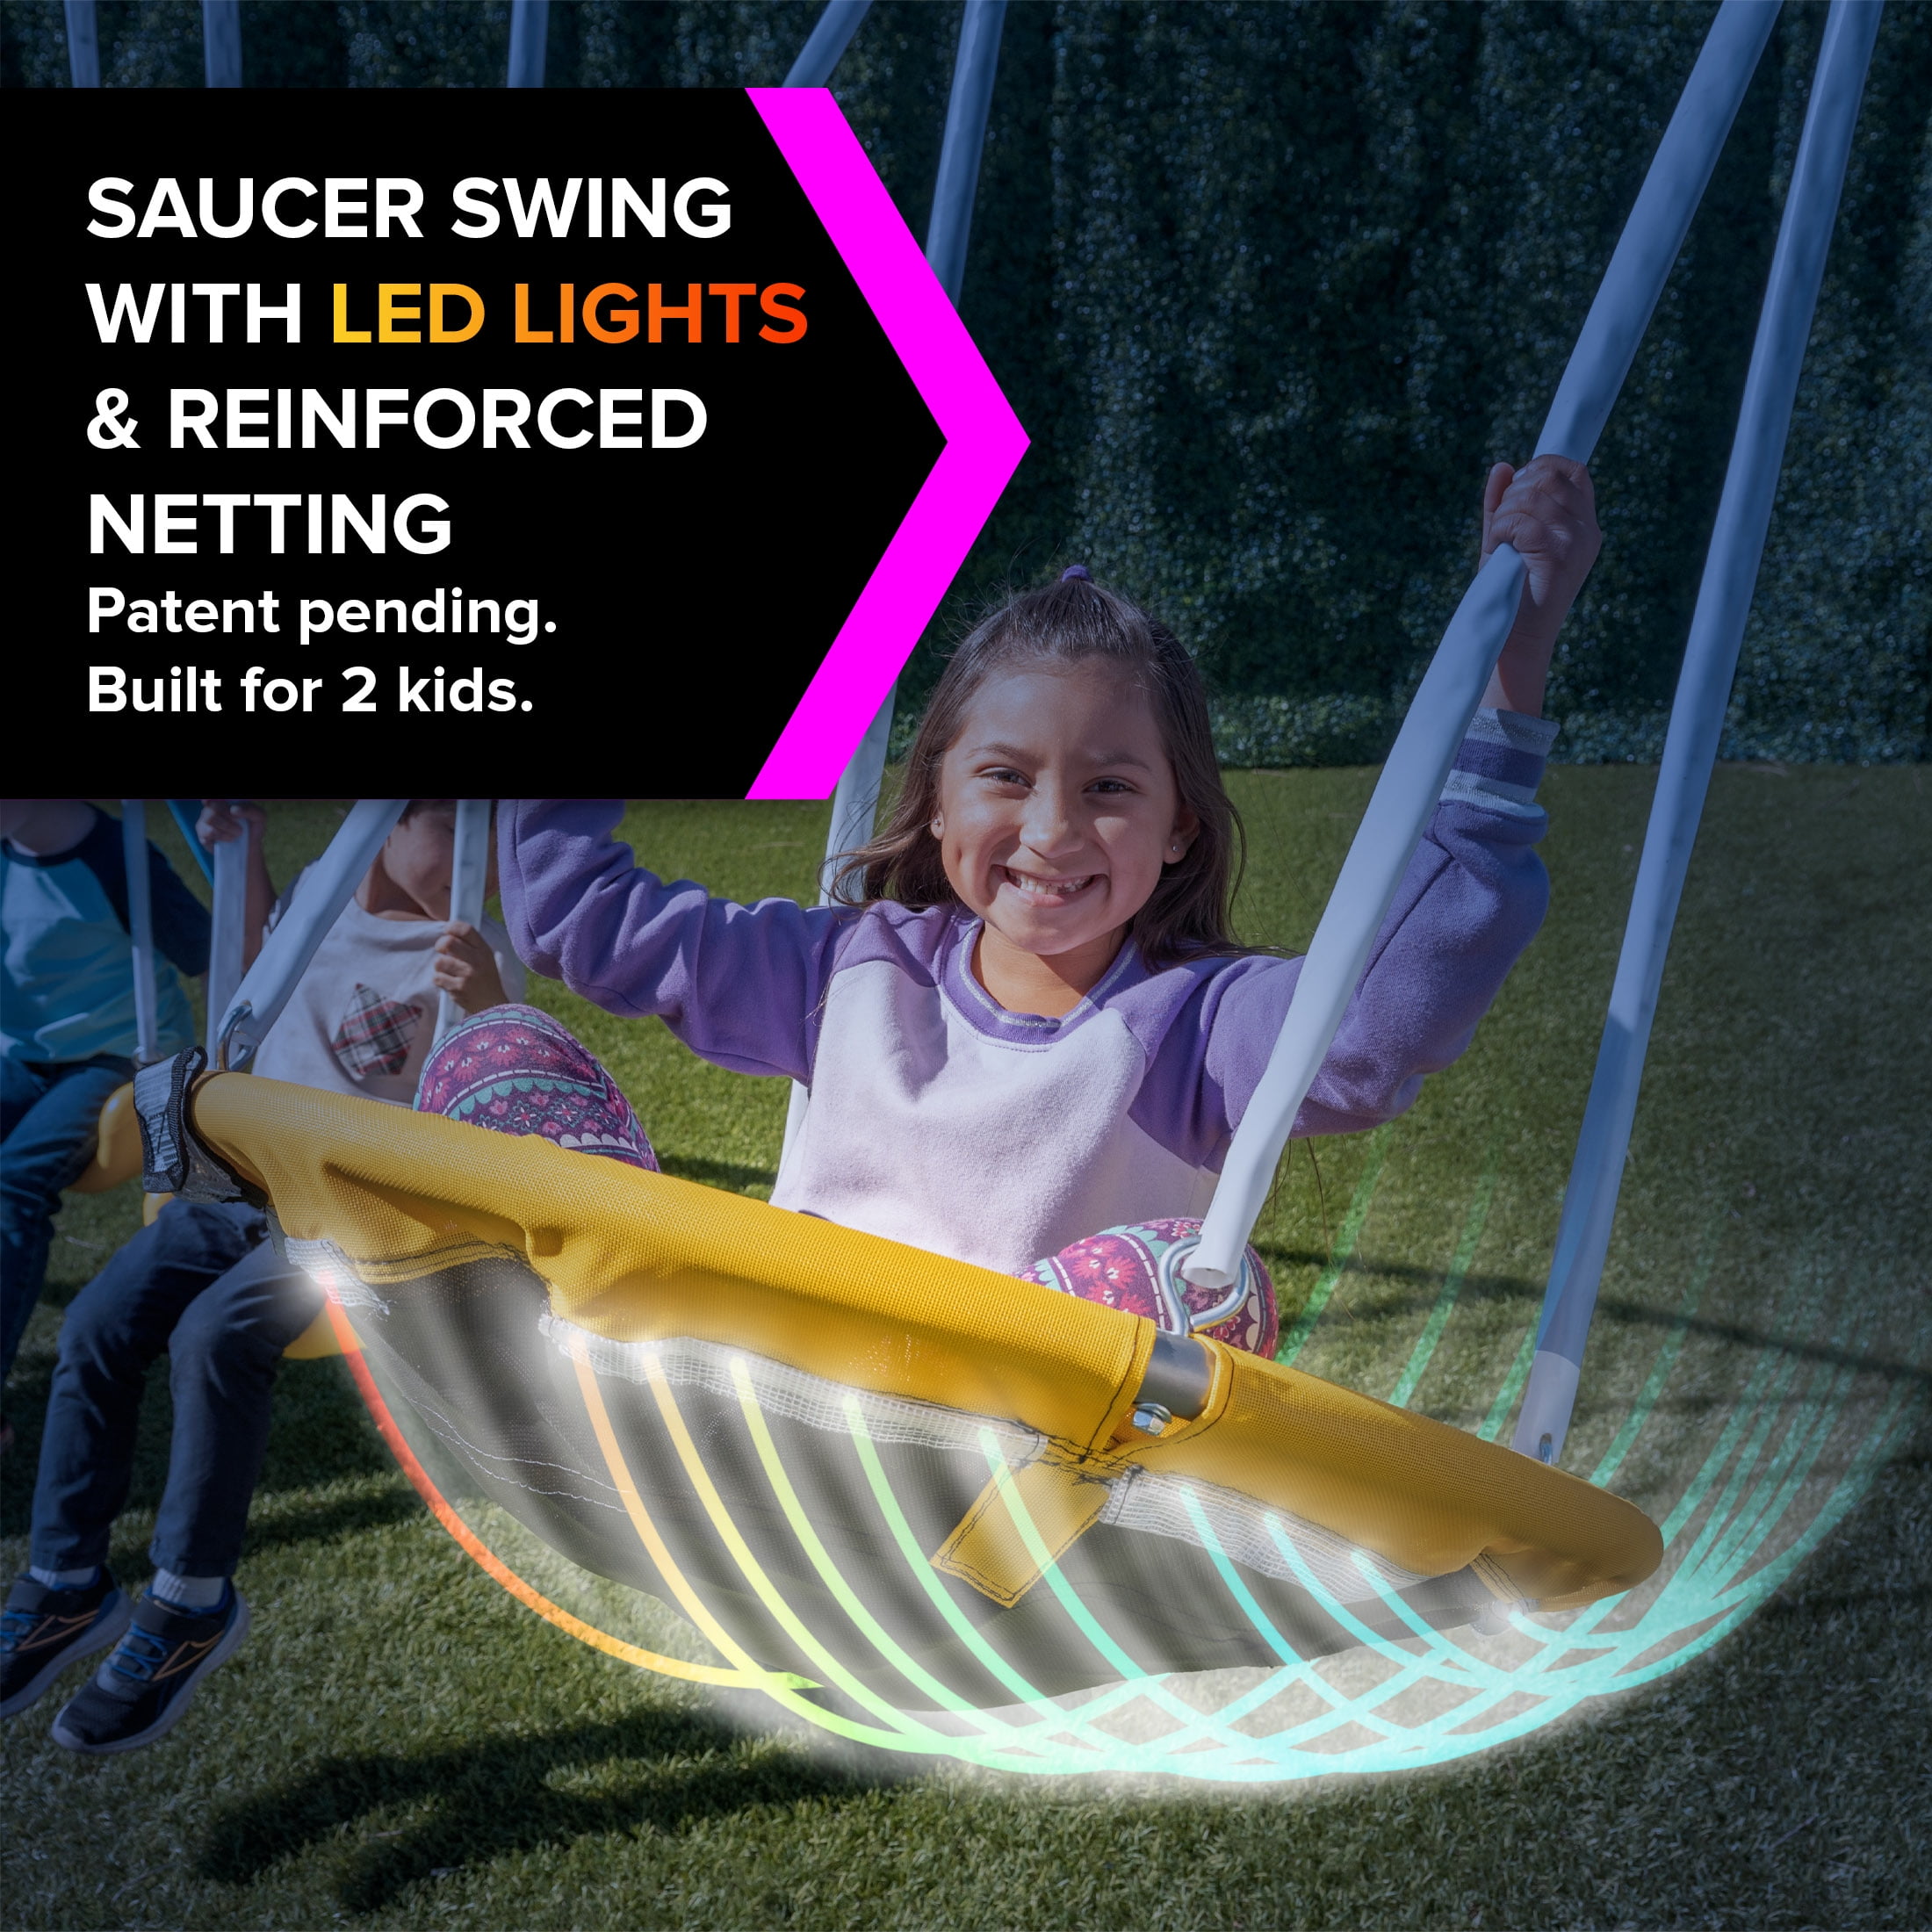 Sportspower Comet Metal Swing Set with LED Light up Saucer Swing - 3